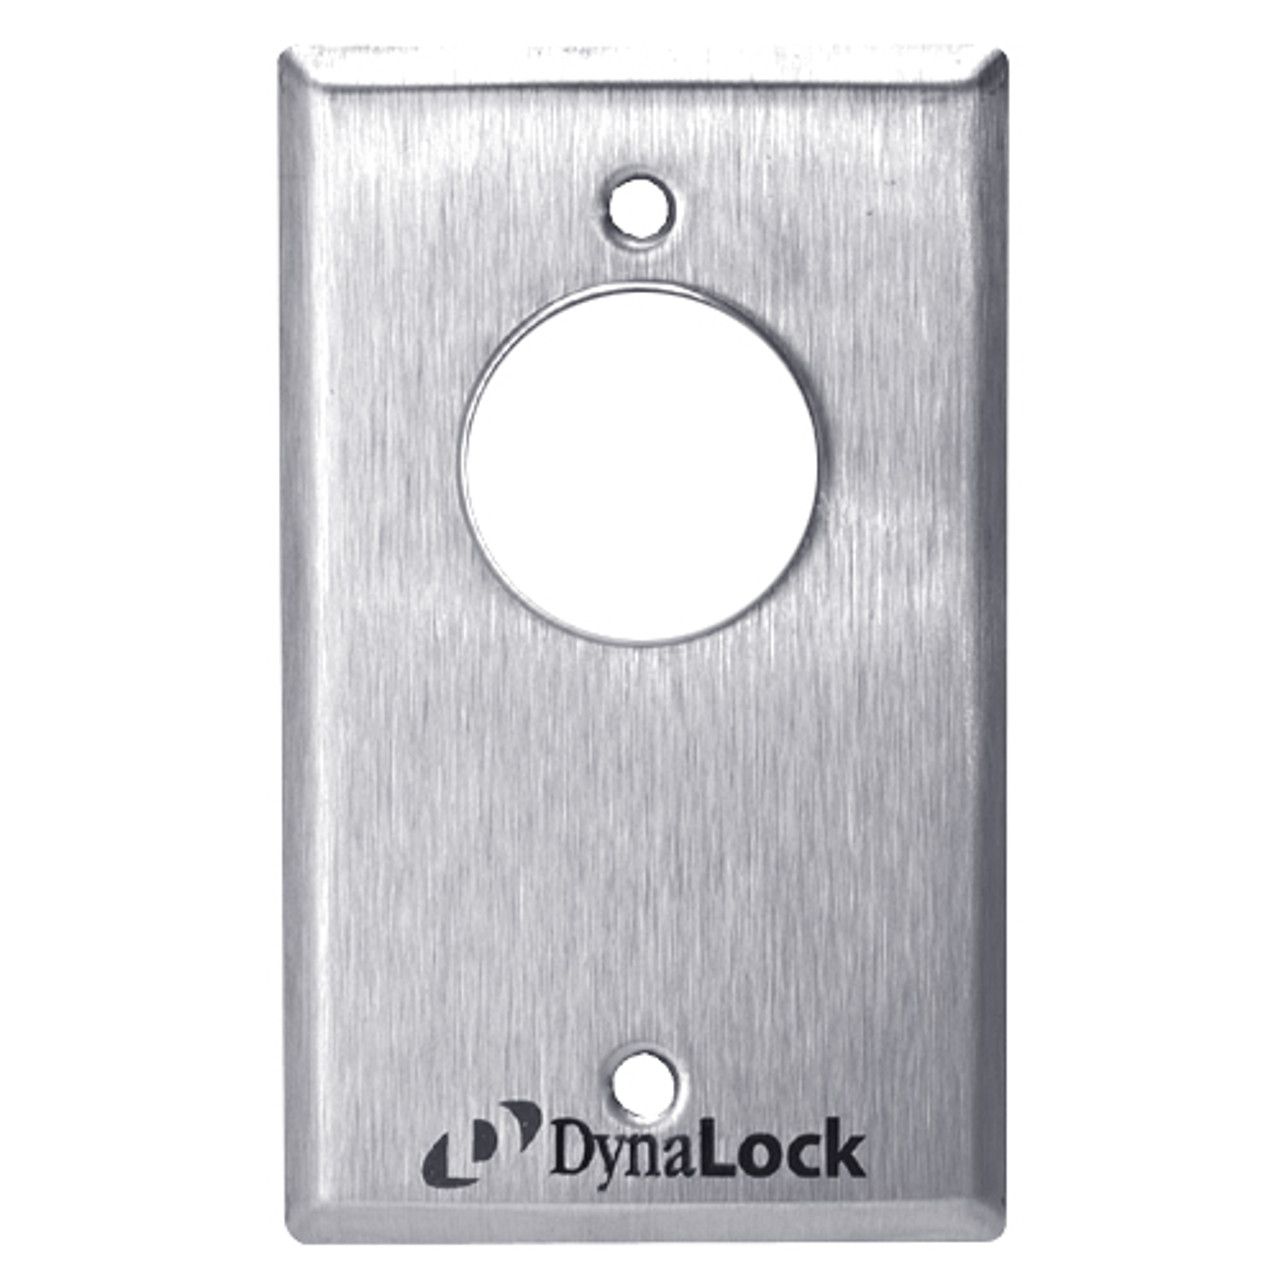 7021-US26-LED DynaLock 7000 Series Keyswitches Maintained 1 Double Pole Double Throw with Bi-Color LED in Bright Chrome